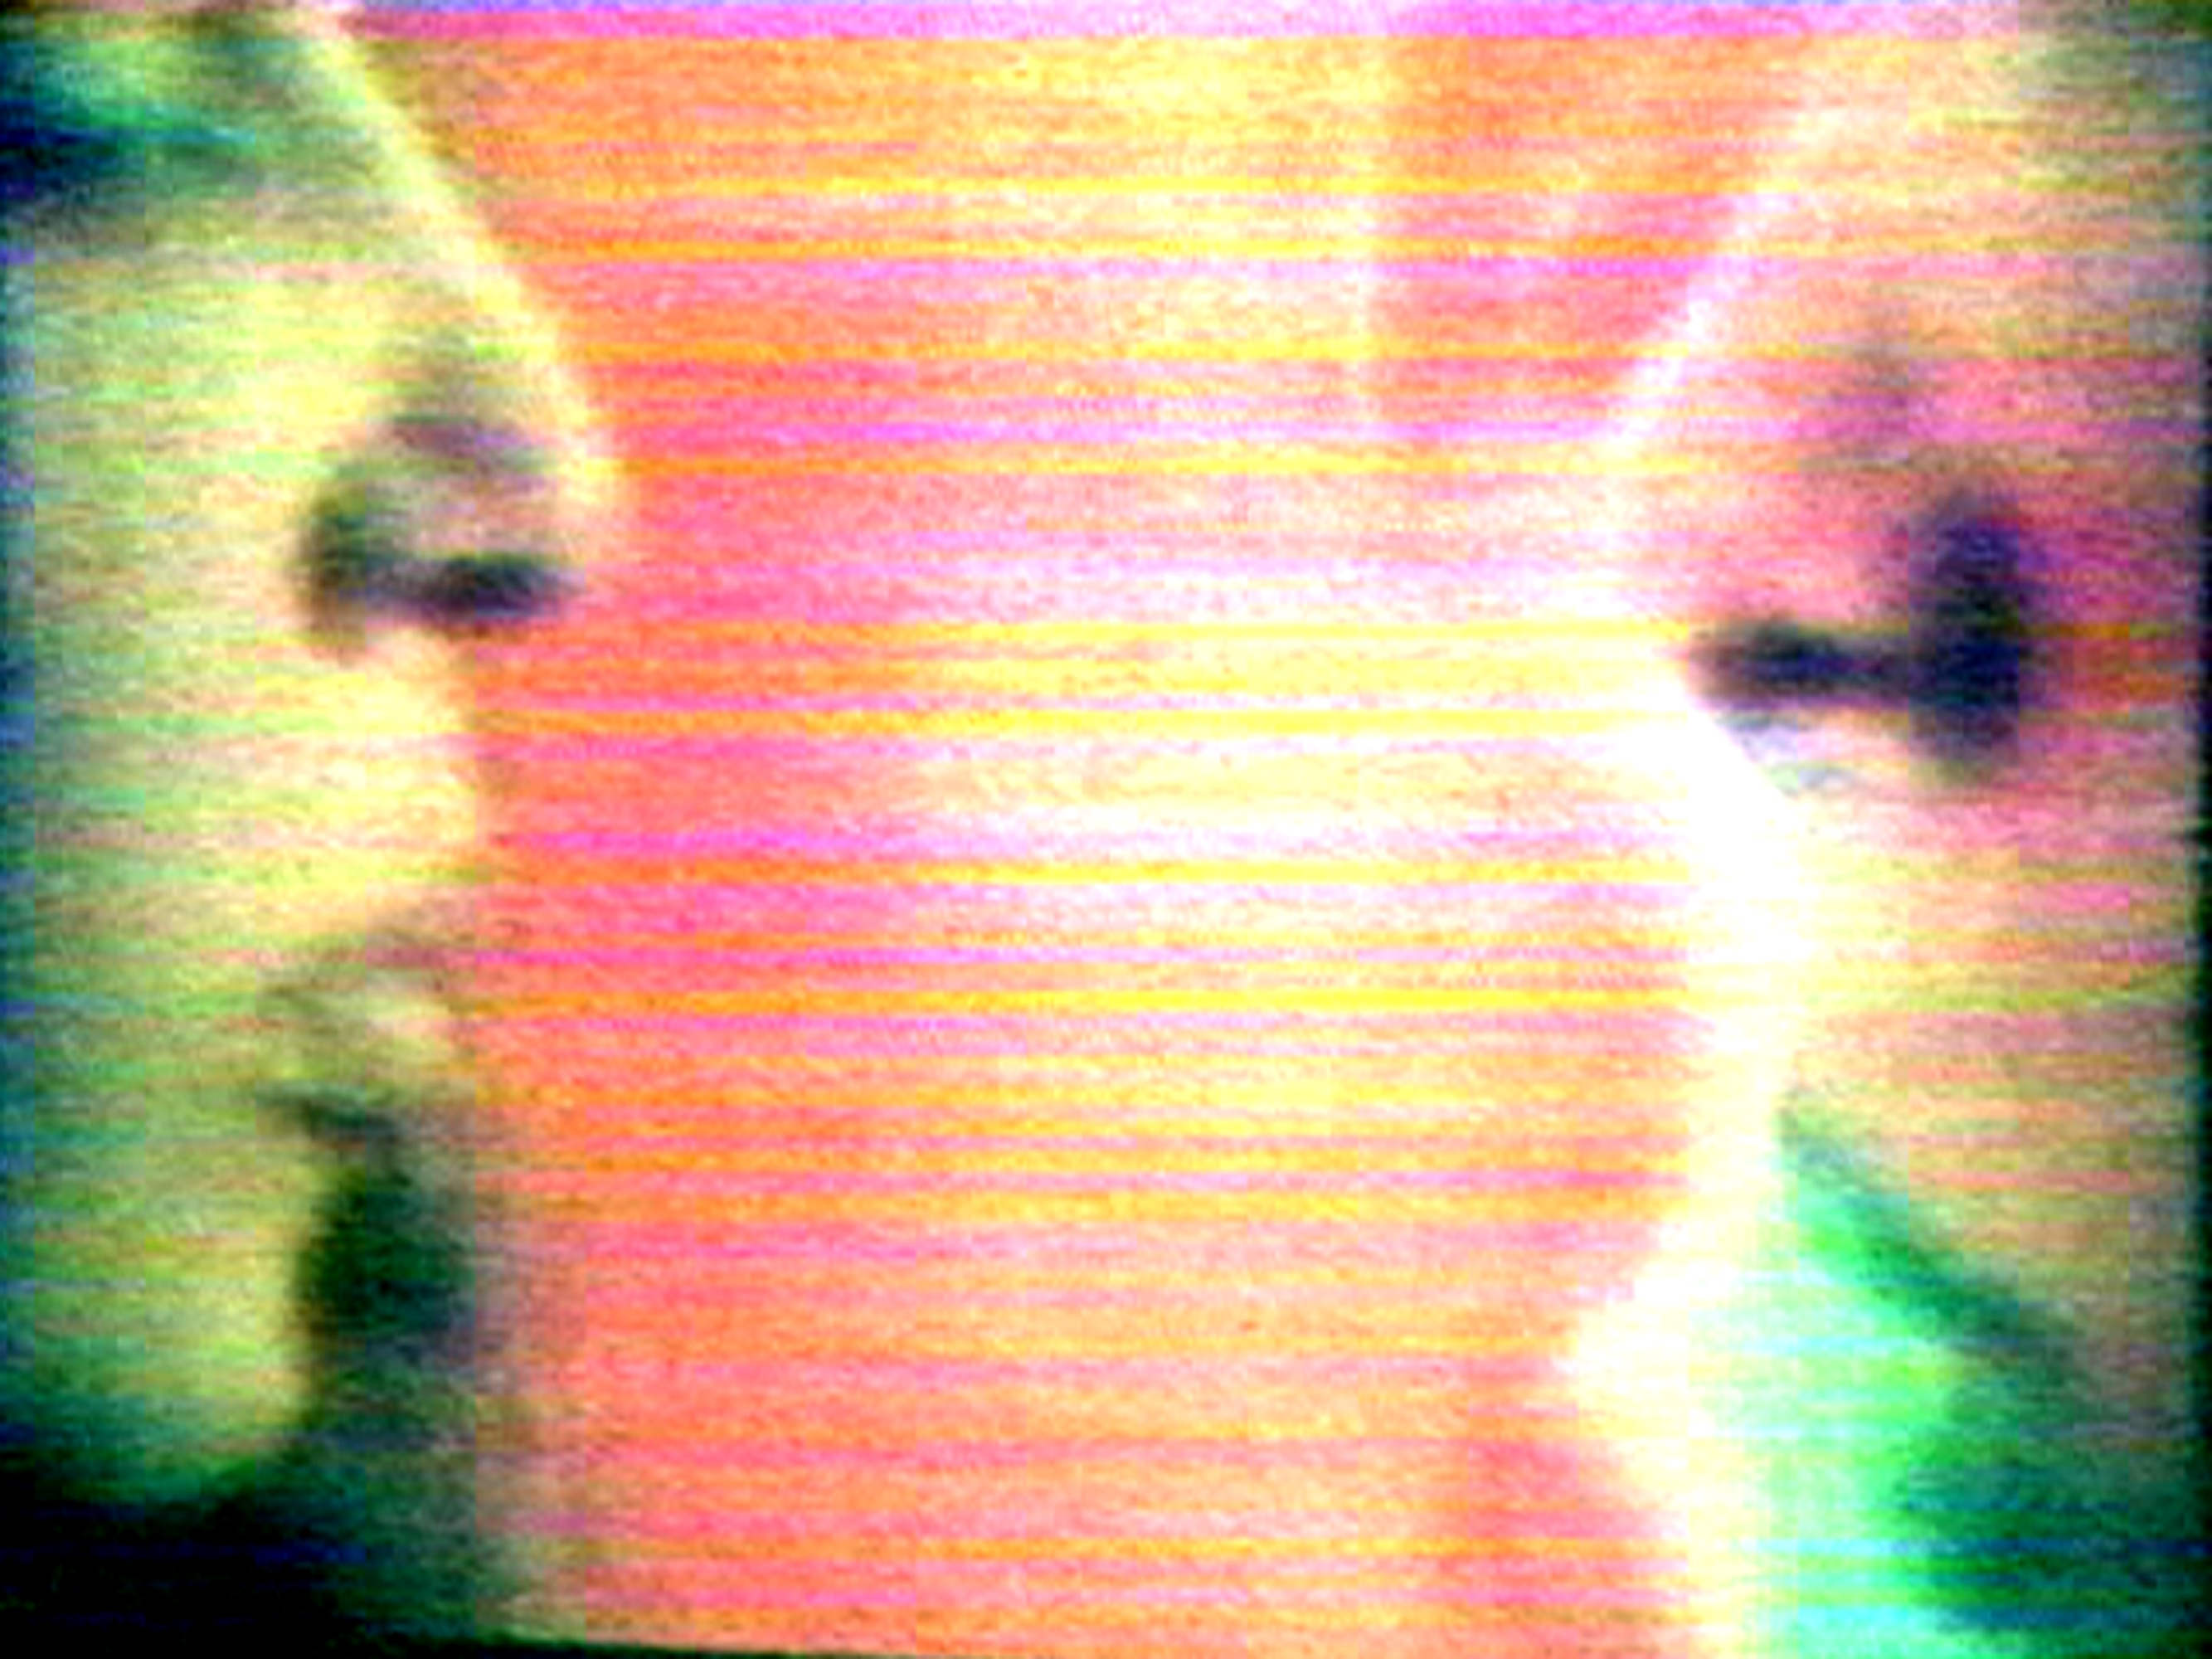 Film still with profiles of two people